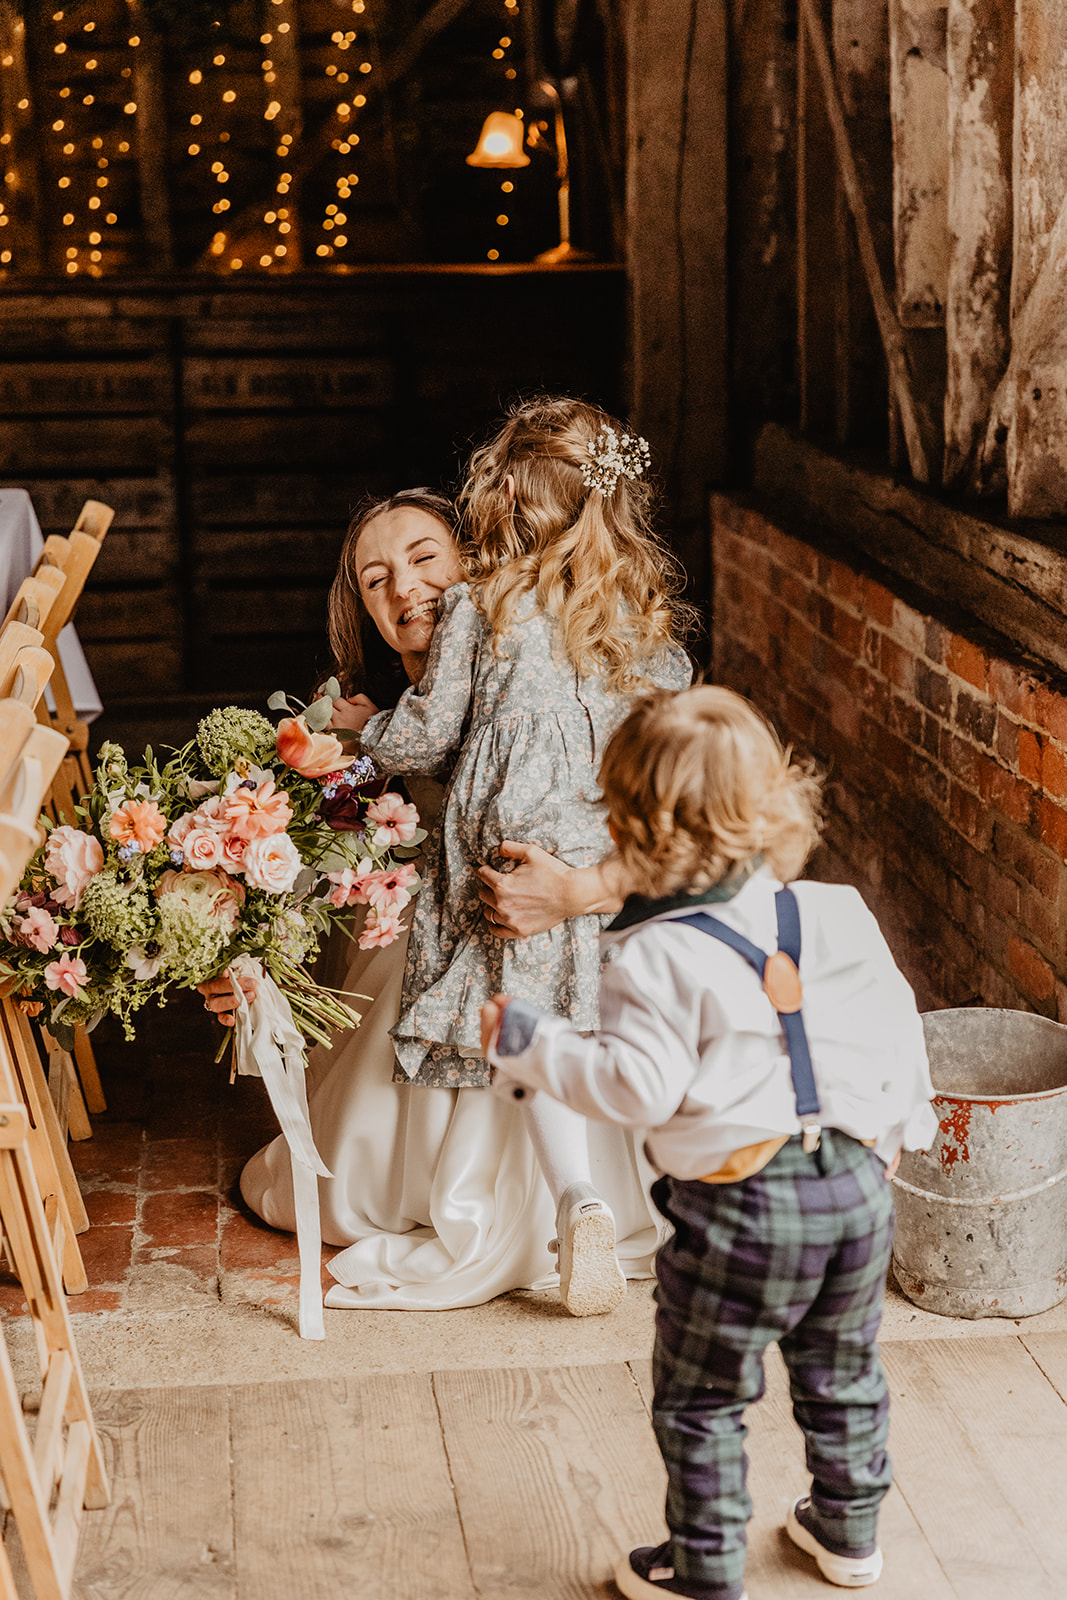 Bride with children at a Secret Barn Wedding, West Sussex. By Olive Joy Photography